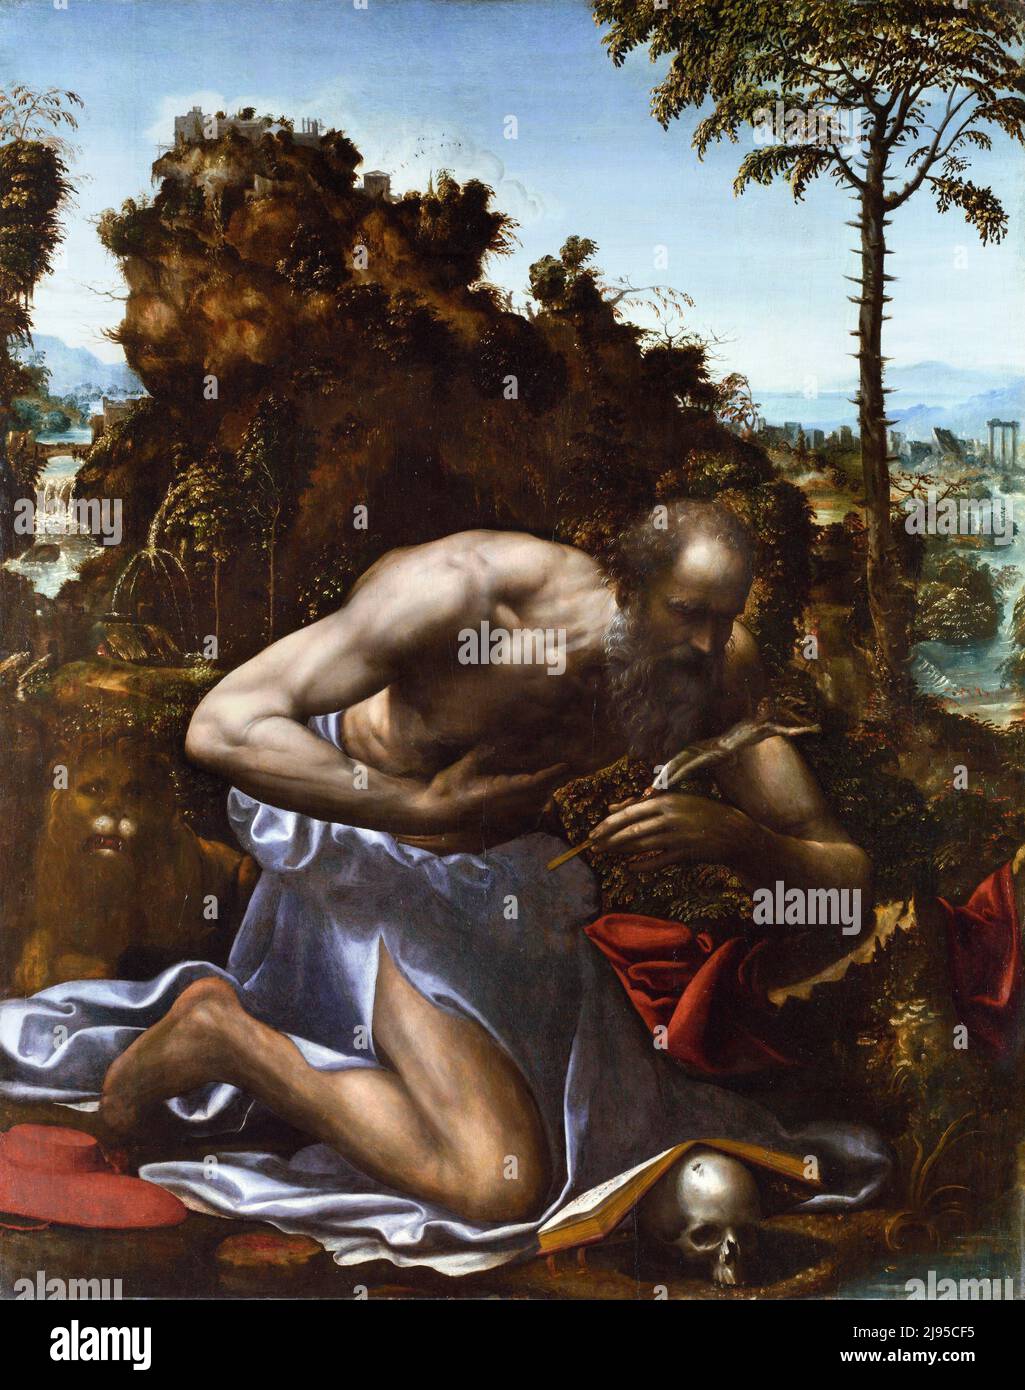 Saint Jerome in Penitence by Sodoma (1477-1549), oil on wood, c. 1535-45 Stock Photo